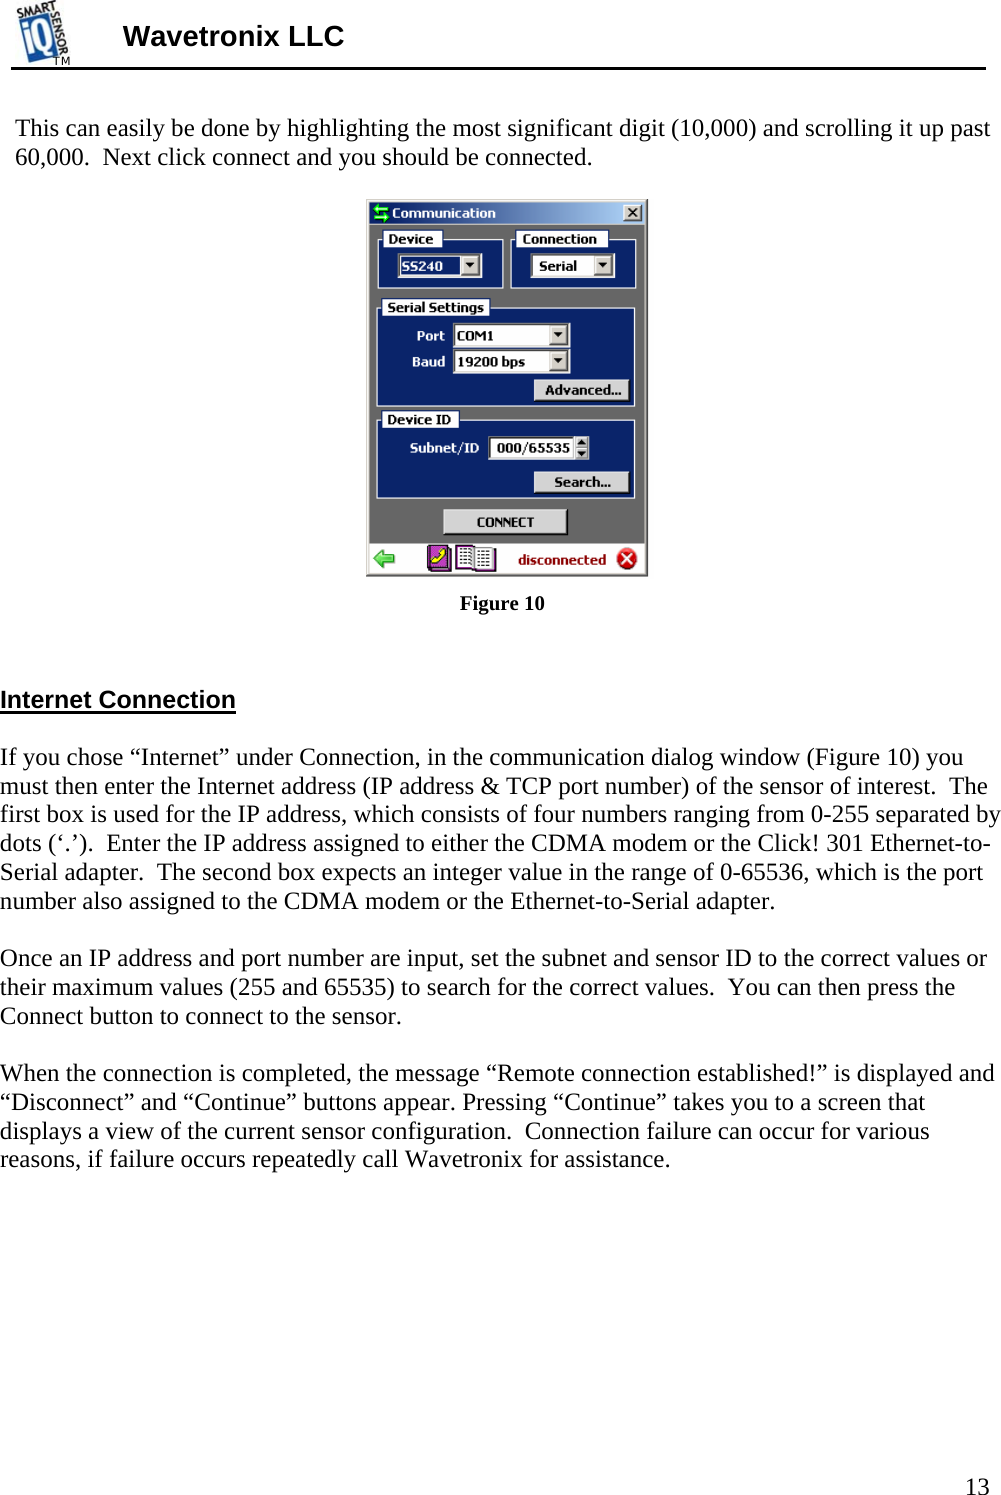 TMTM  Wavetronix LLC This can easily be done by highlighting the most significant digit (10,000) and scrolling it up past 60,000.  Next click connect and you should be connected.   Figure 10   Internet Connection  If you chose “Internet” under Connection, in the communication dialog window (Figure 10) you must then enter the Internet address (IP address &amp; TCP port number) of the sensor of interest.  The first box is used for the IP address, which consists of four numbers ranging from 0-255 separated by dots (‘.’).  Enter the IP address assigned to either the CDMA modem or the Click! 301 Ethernet-to-Serial adapter.  The second box expects an integer value in the range of 0-65536, which is the port number also assigned to the CDMA modem or the Ethernet-to-Serial adapter.  Once an IP address and port number are input, set the subnet and sensor ID to the correct values or their maximum values (255 and 65535) to search for the correct values.  You can then press the Connect button to connect to the sensor.     When the connection is completed, the message “Remote connection established!” is displayed and “Disconnect” and “Continue” buttons appear. Pressing “Continue” takes you to a screen that displays a view of the current sensor configuration.  Connection failure can occur for various reasons, if failure occurs repeatedly call Wavetronix for assistance.  13 